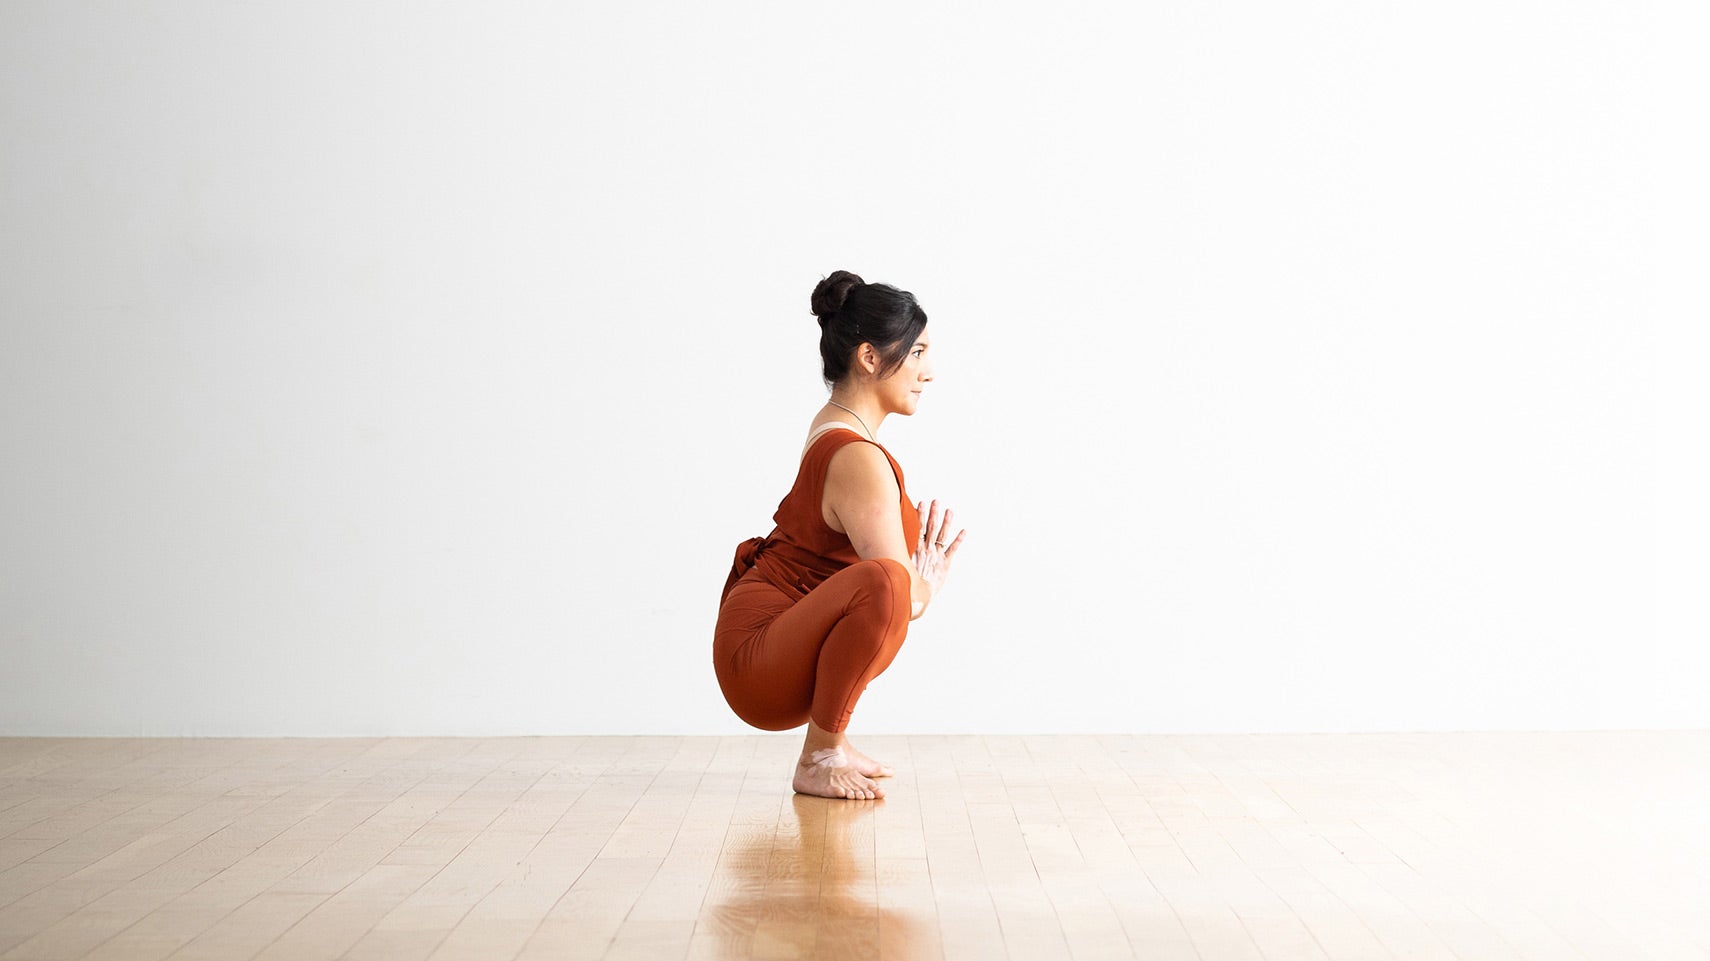 Easy Yoga - 7-Minute Sequence Poses For Beginners